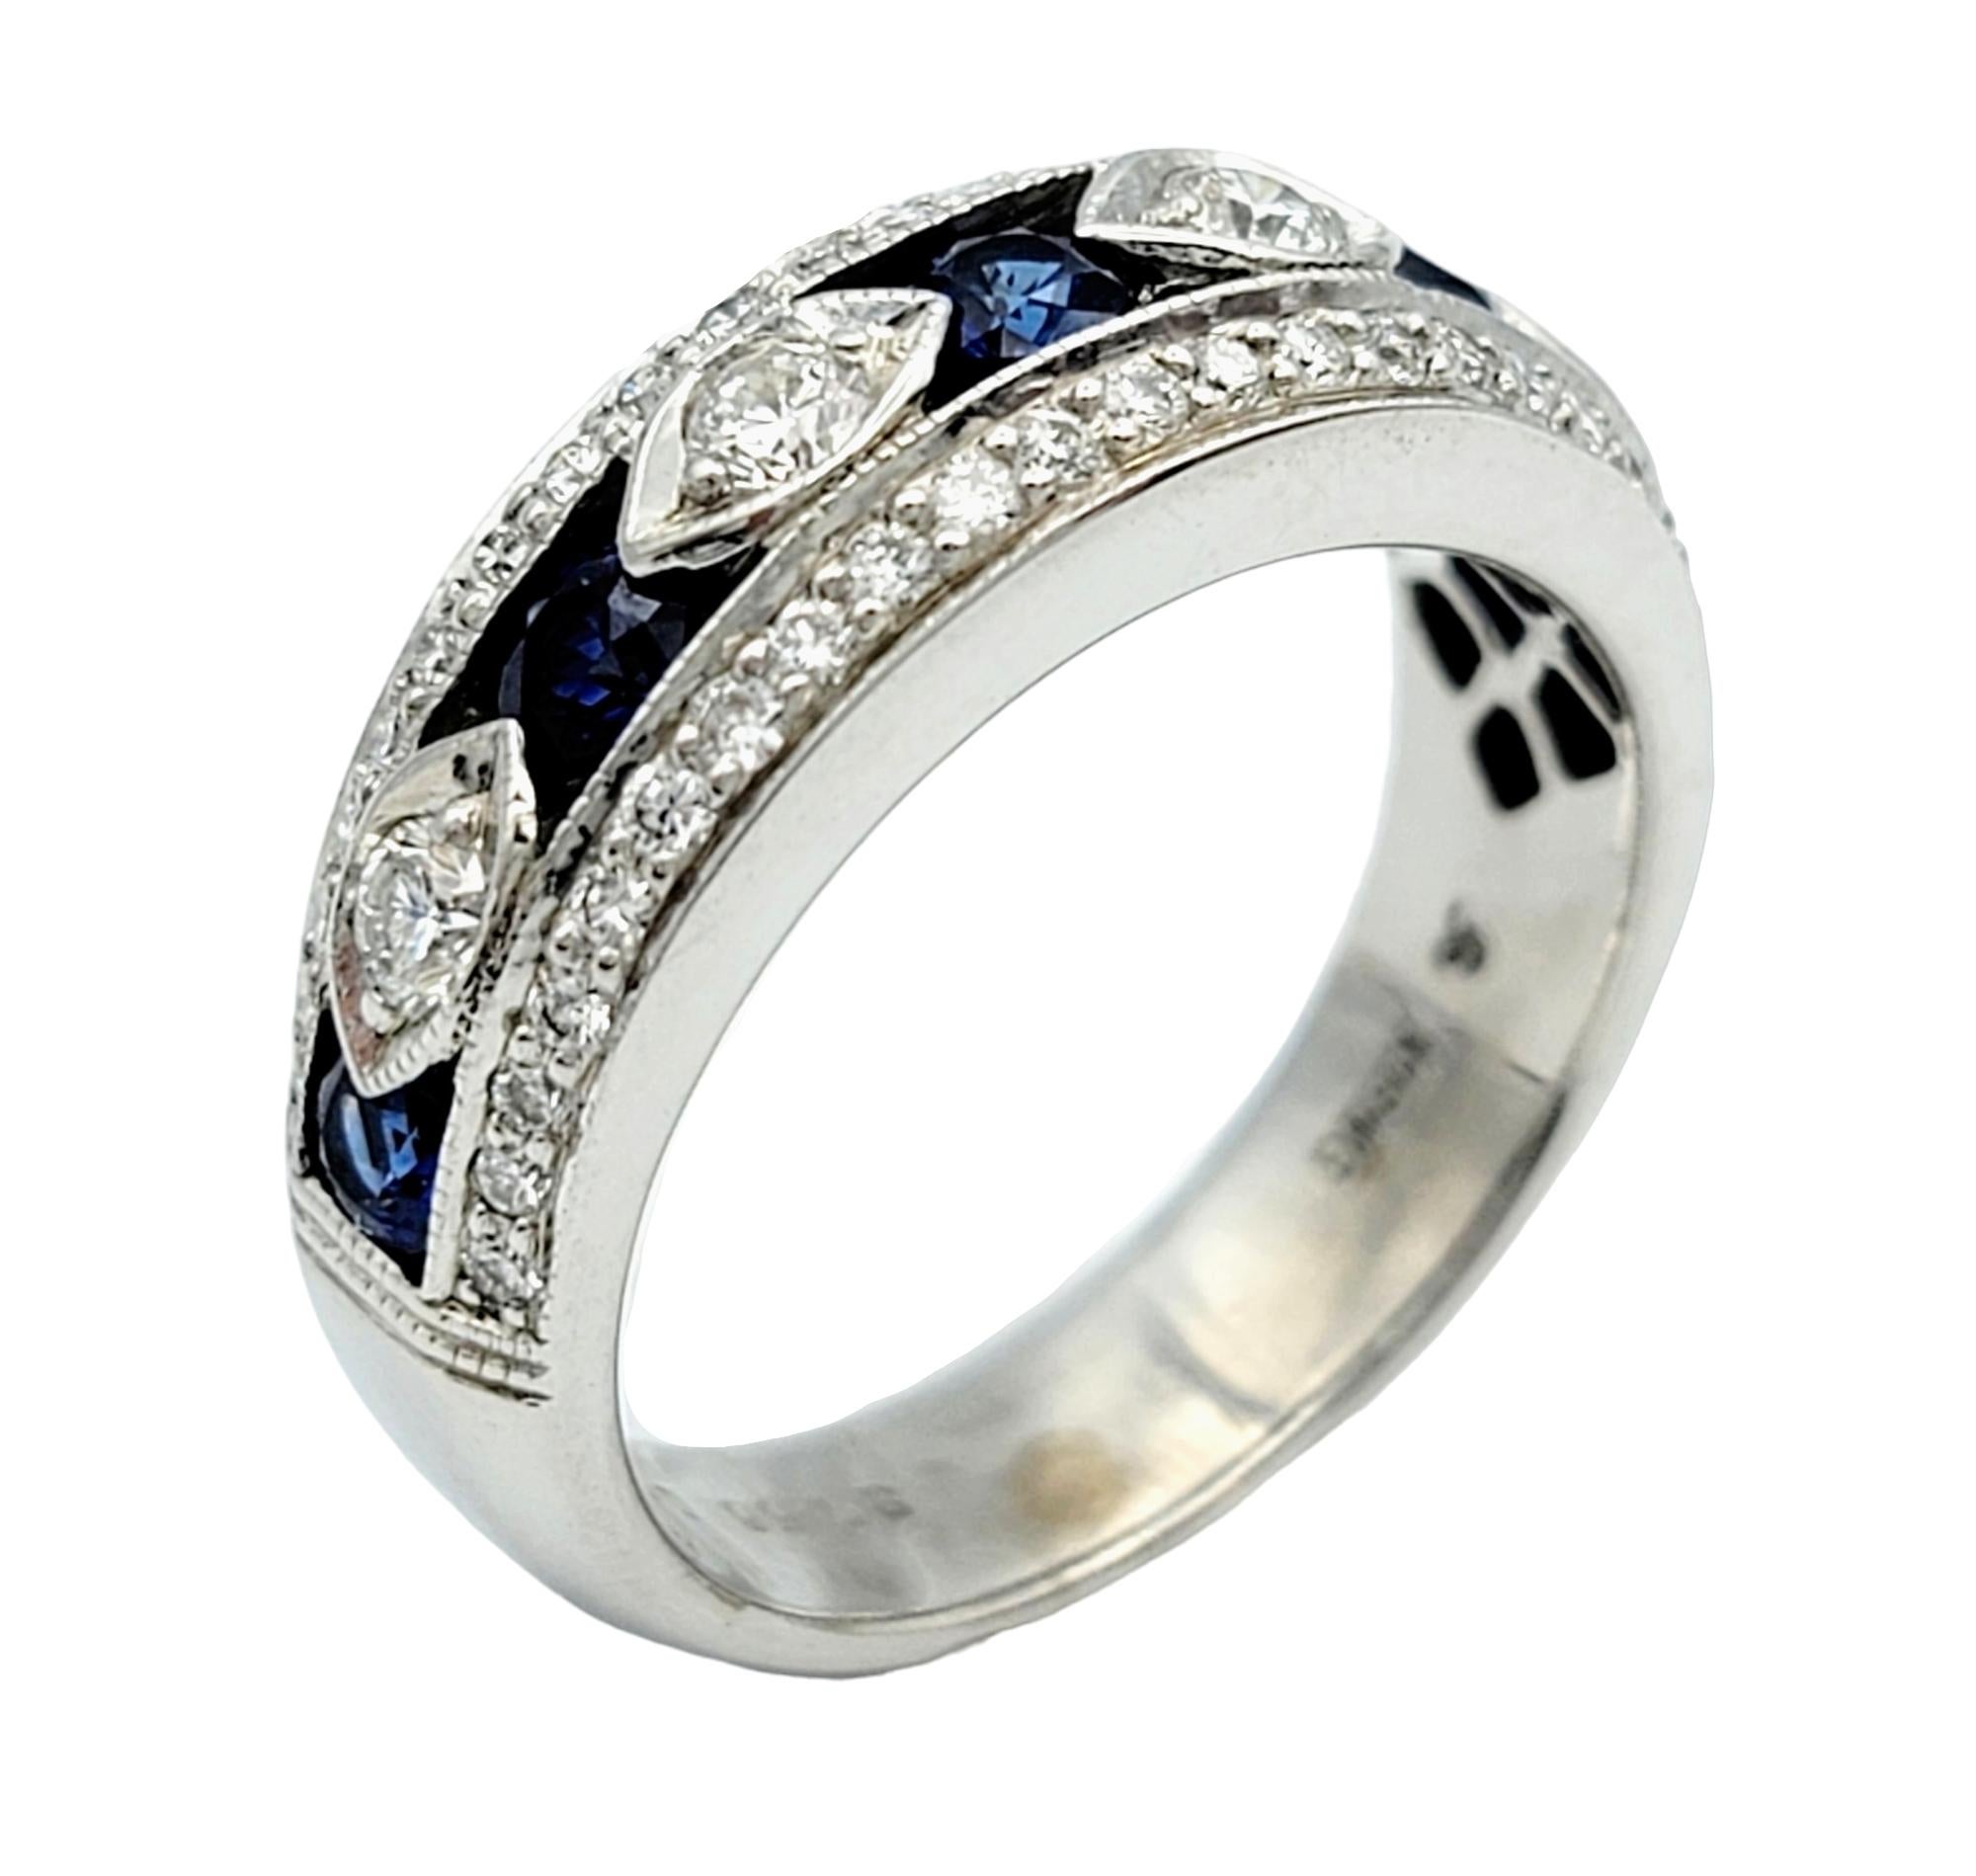 Round Cut Alternating Diamond and Sapphire Band Ring with Milgrain in 18 Karat White Gold For Sale